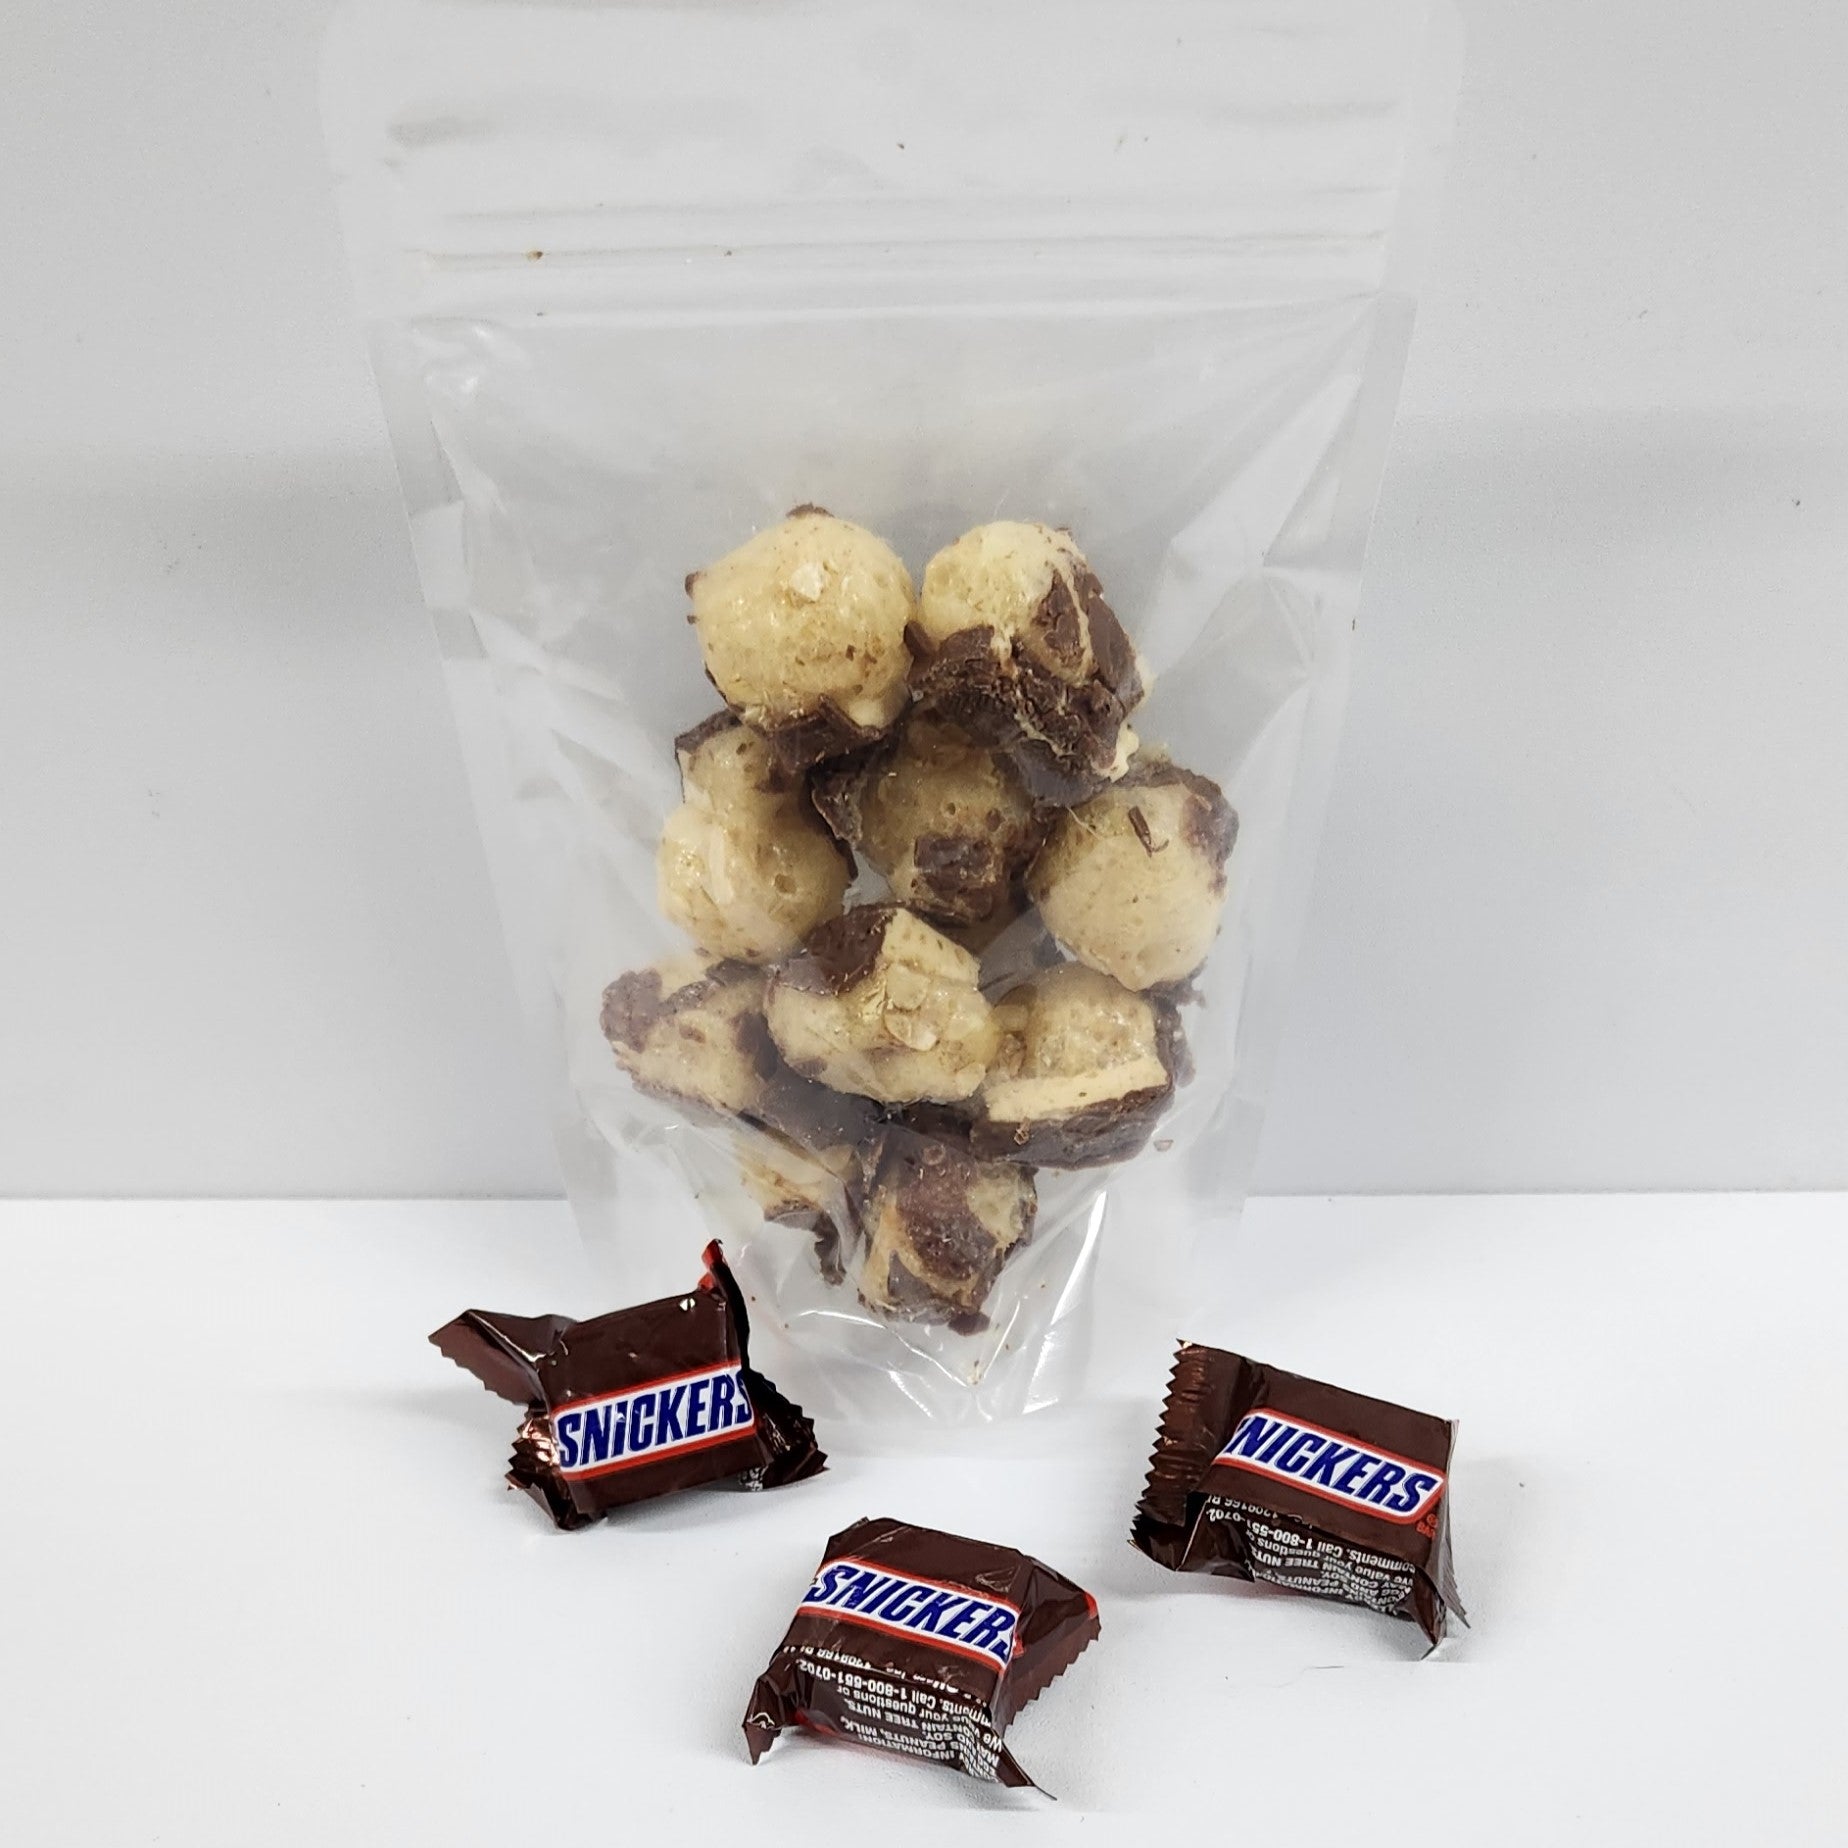 A package of Freeze Dried Snickers